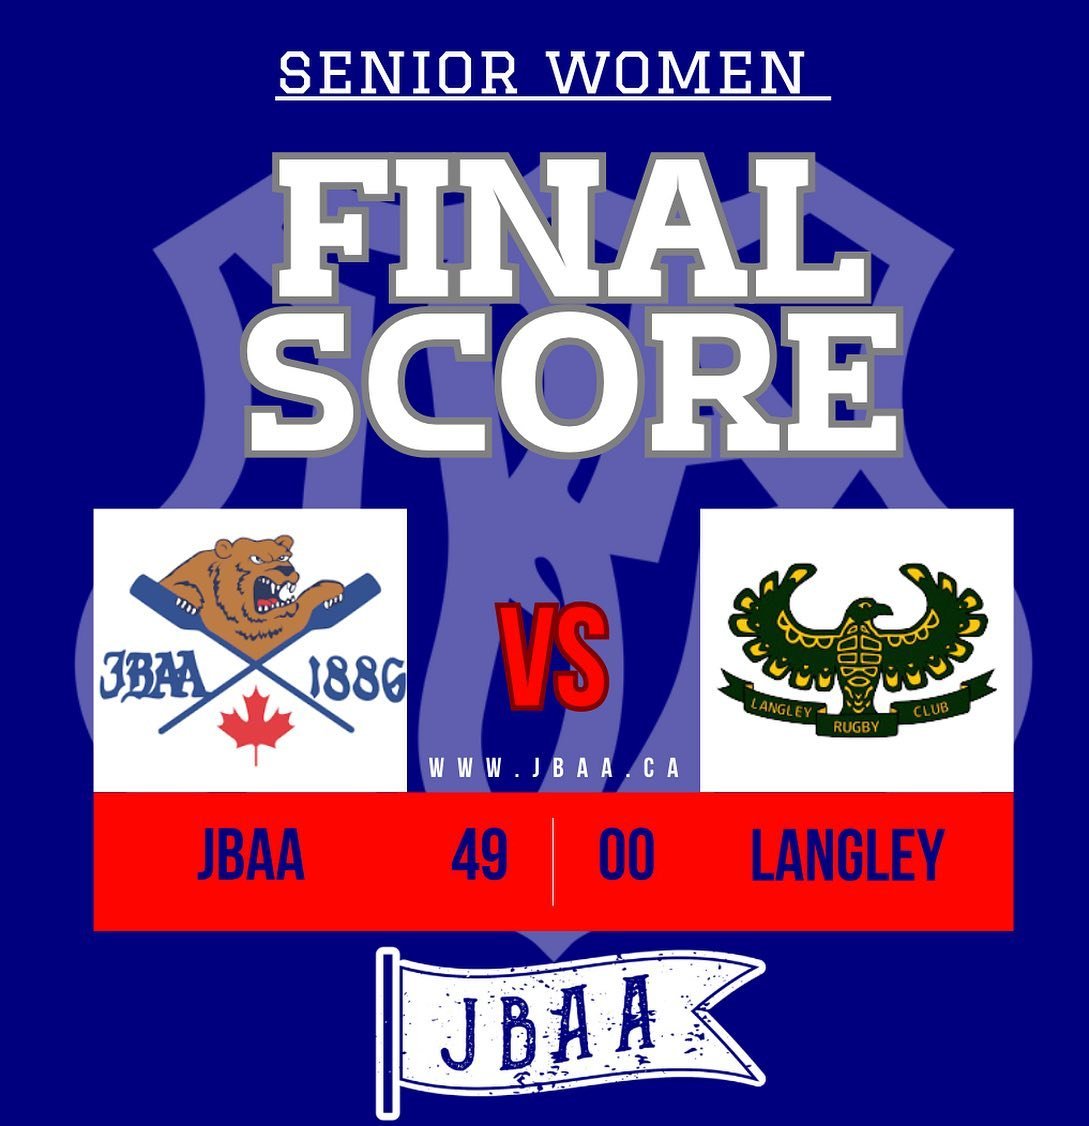 Final score from yesterday along with some great action shots!! 

On to the second round we go!!

#huddyhuddy #cantstopthebear
#wedecide #bang @bcrugbyunion